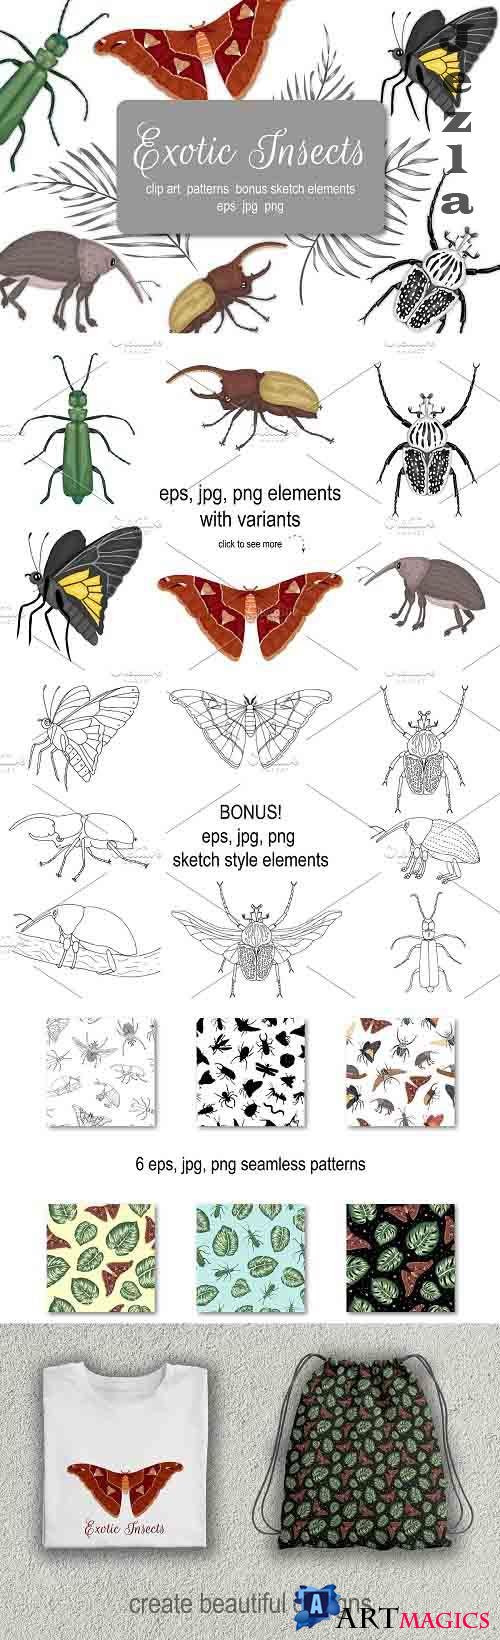 Exotic Insects - 4263317